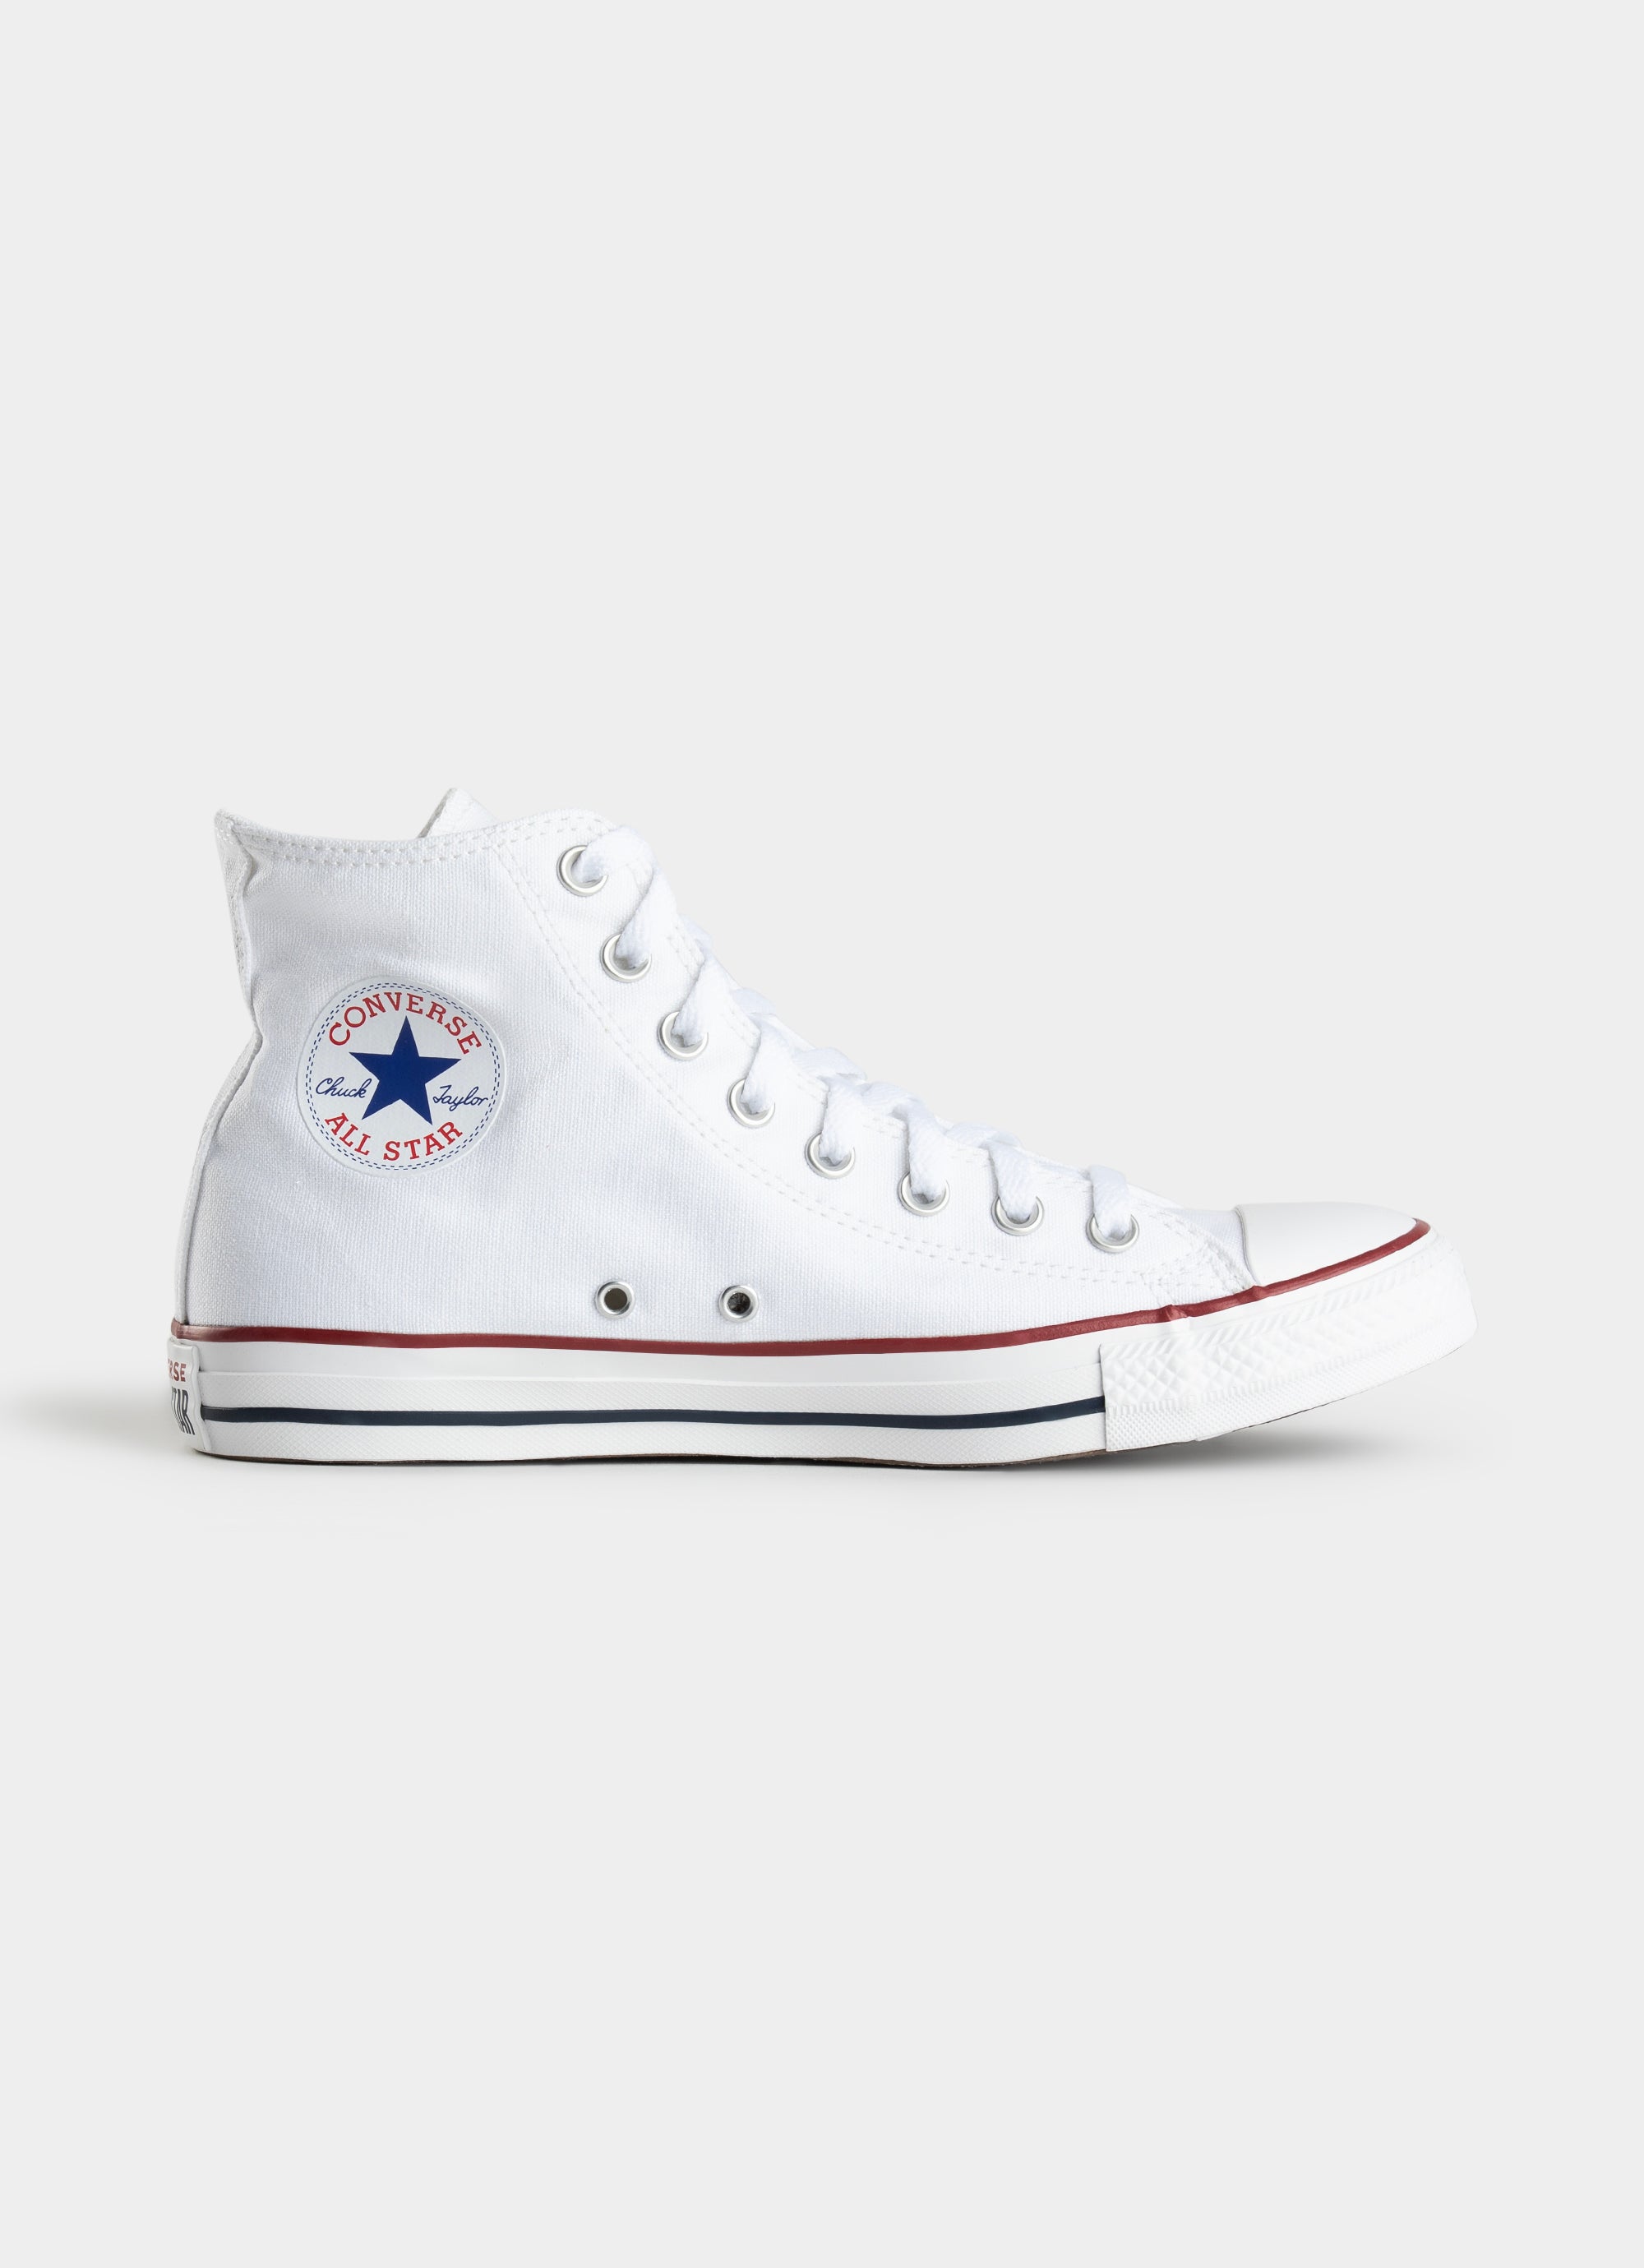 Converse Chuck Taylor All High Shoe in White | Red